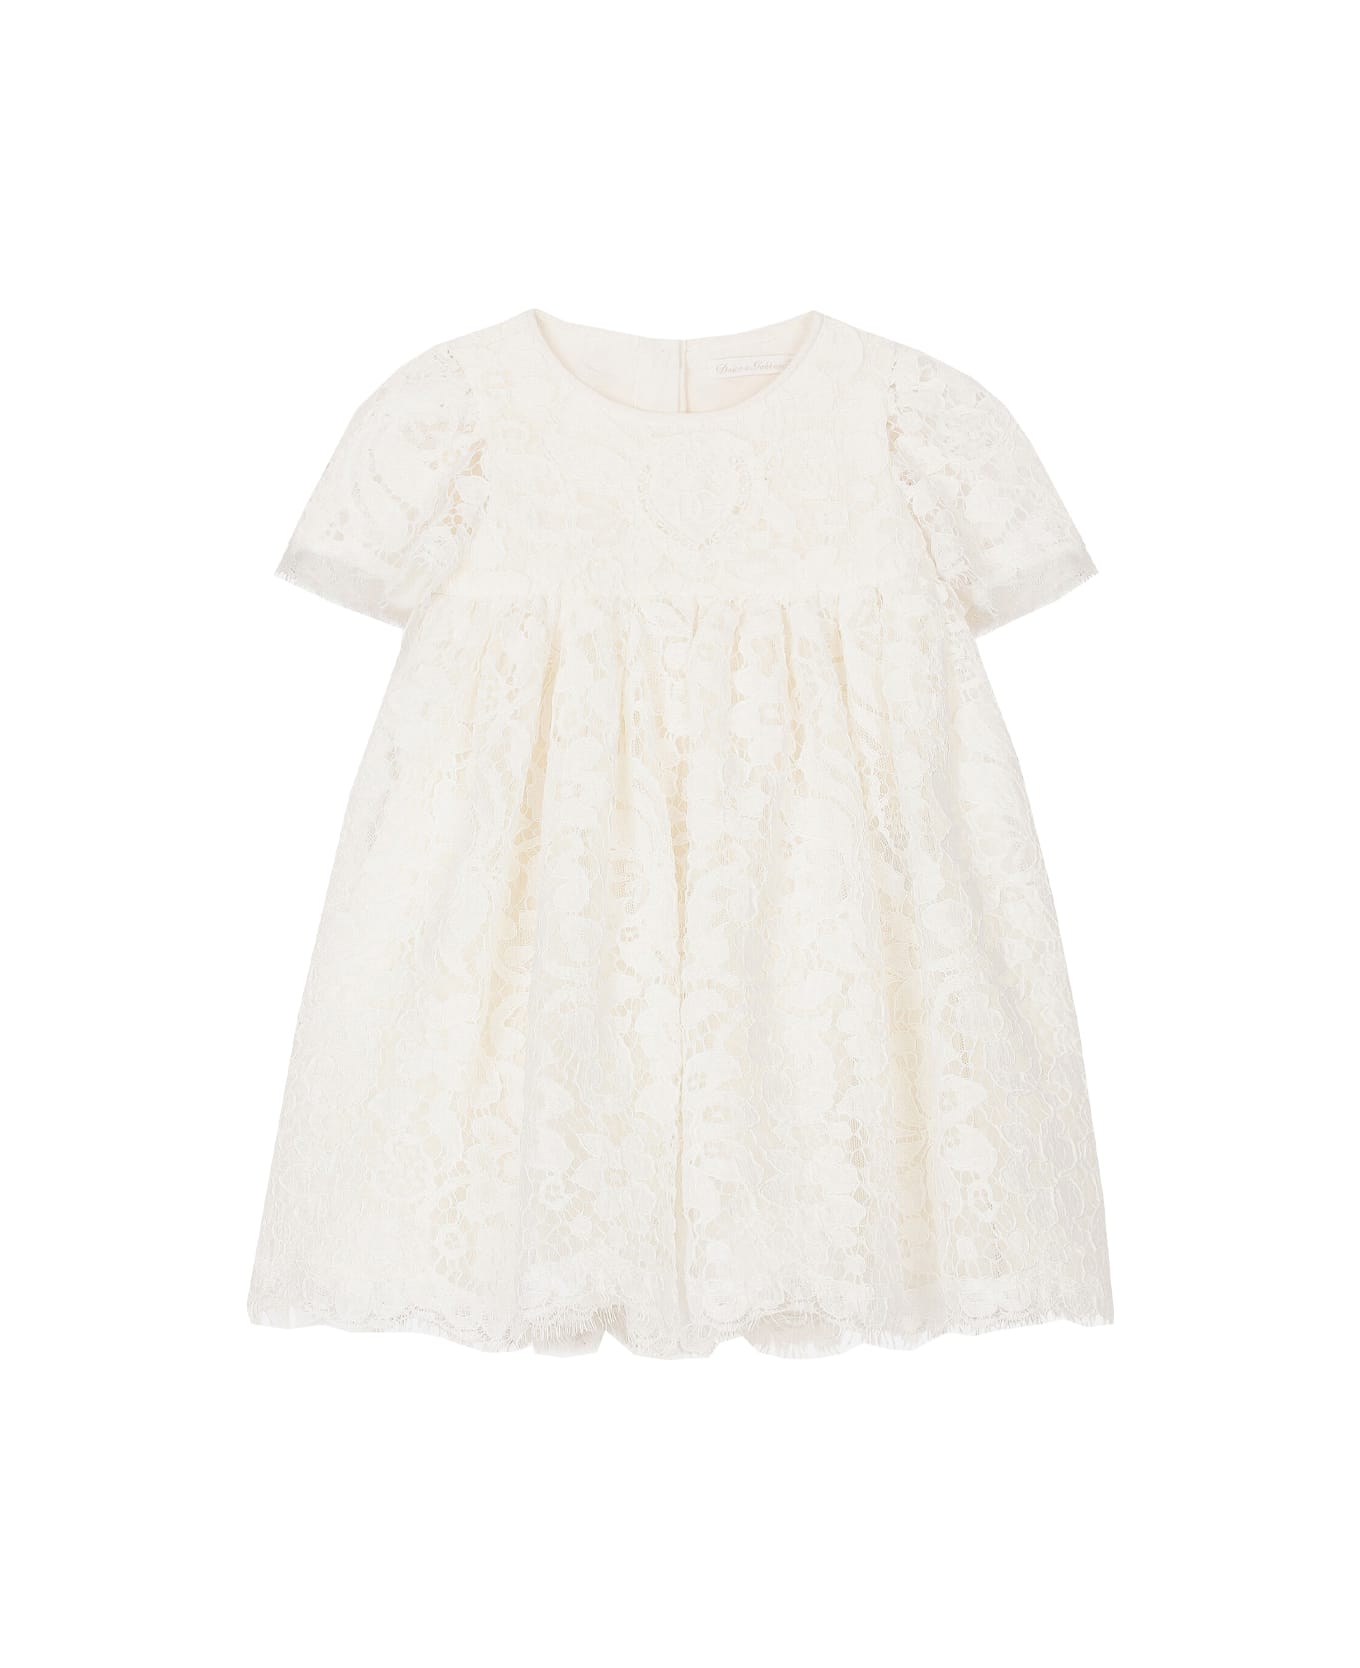 Dolce & Gabbana Short Sleeve Baptism Dress In Empire Cut Lace - White